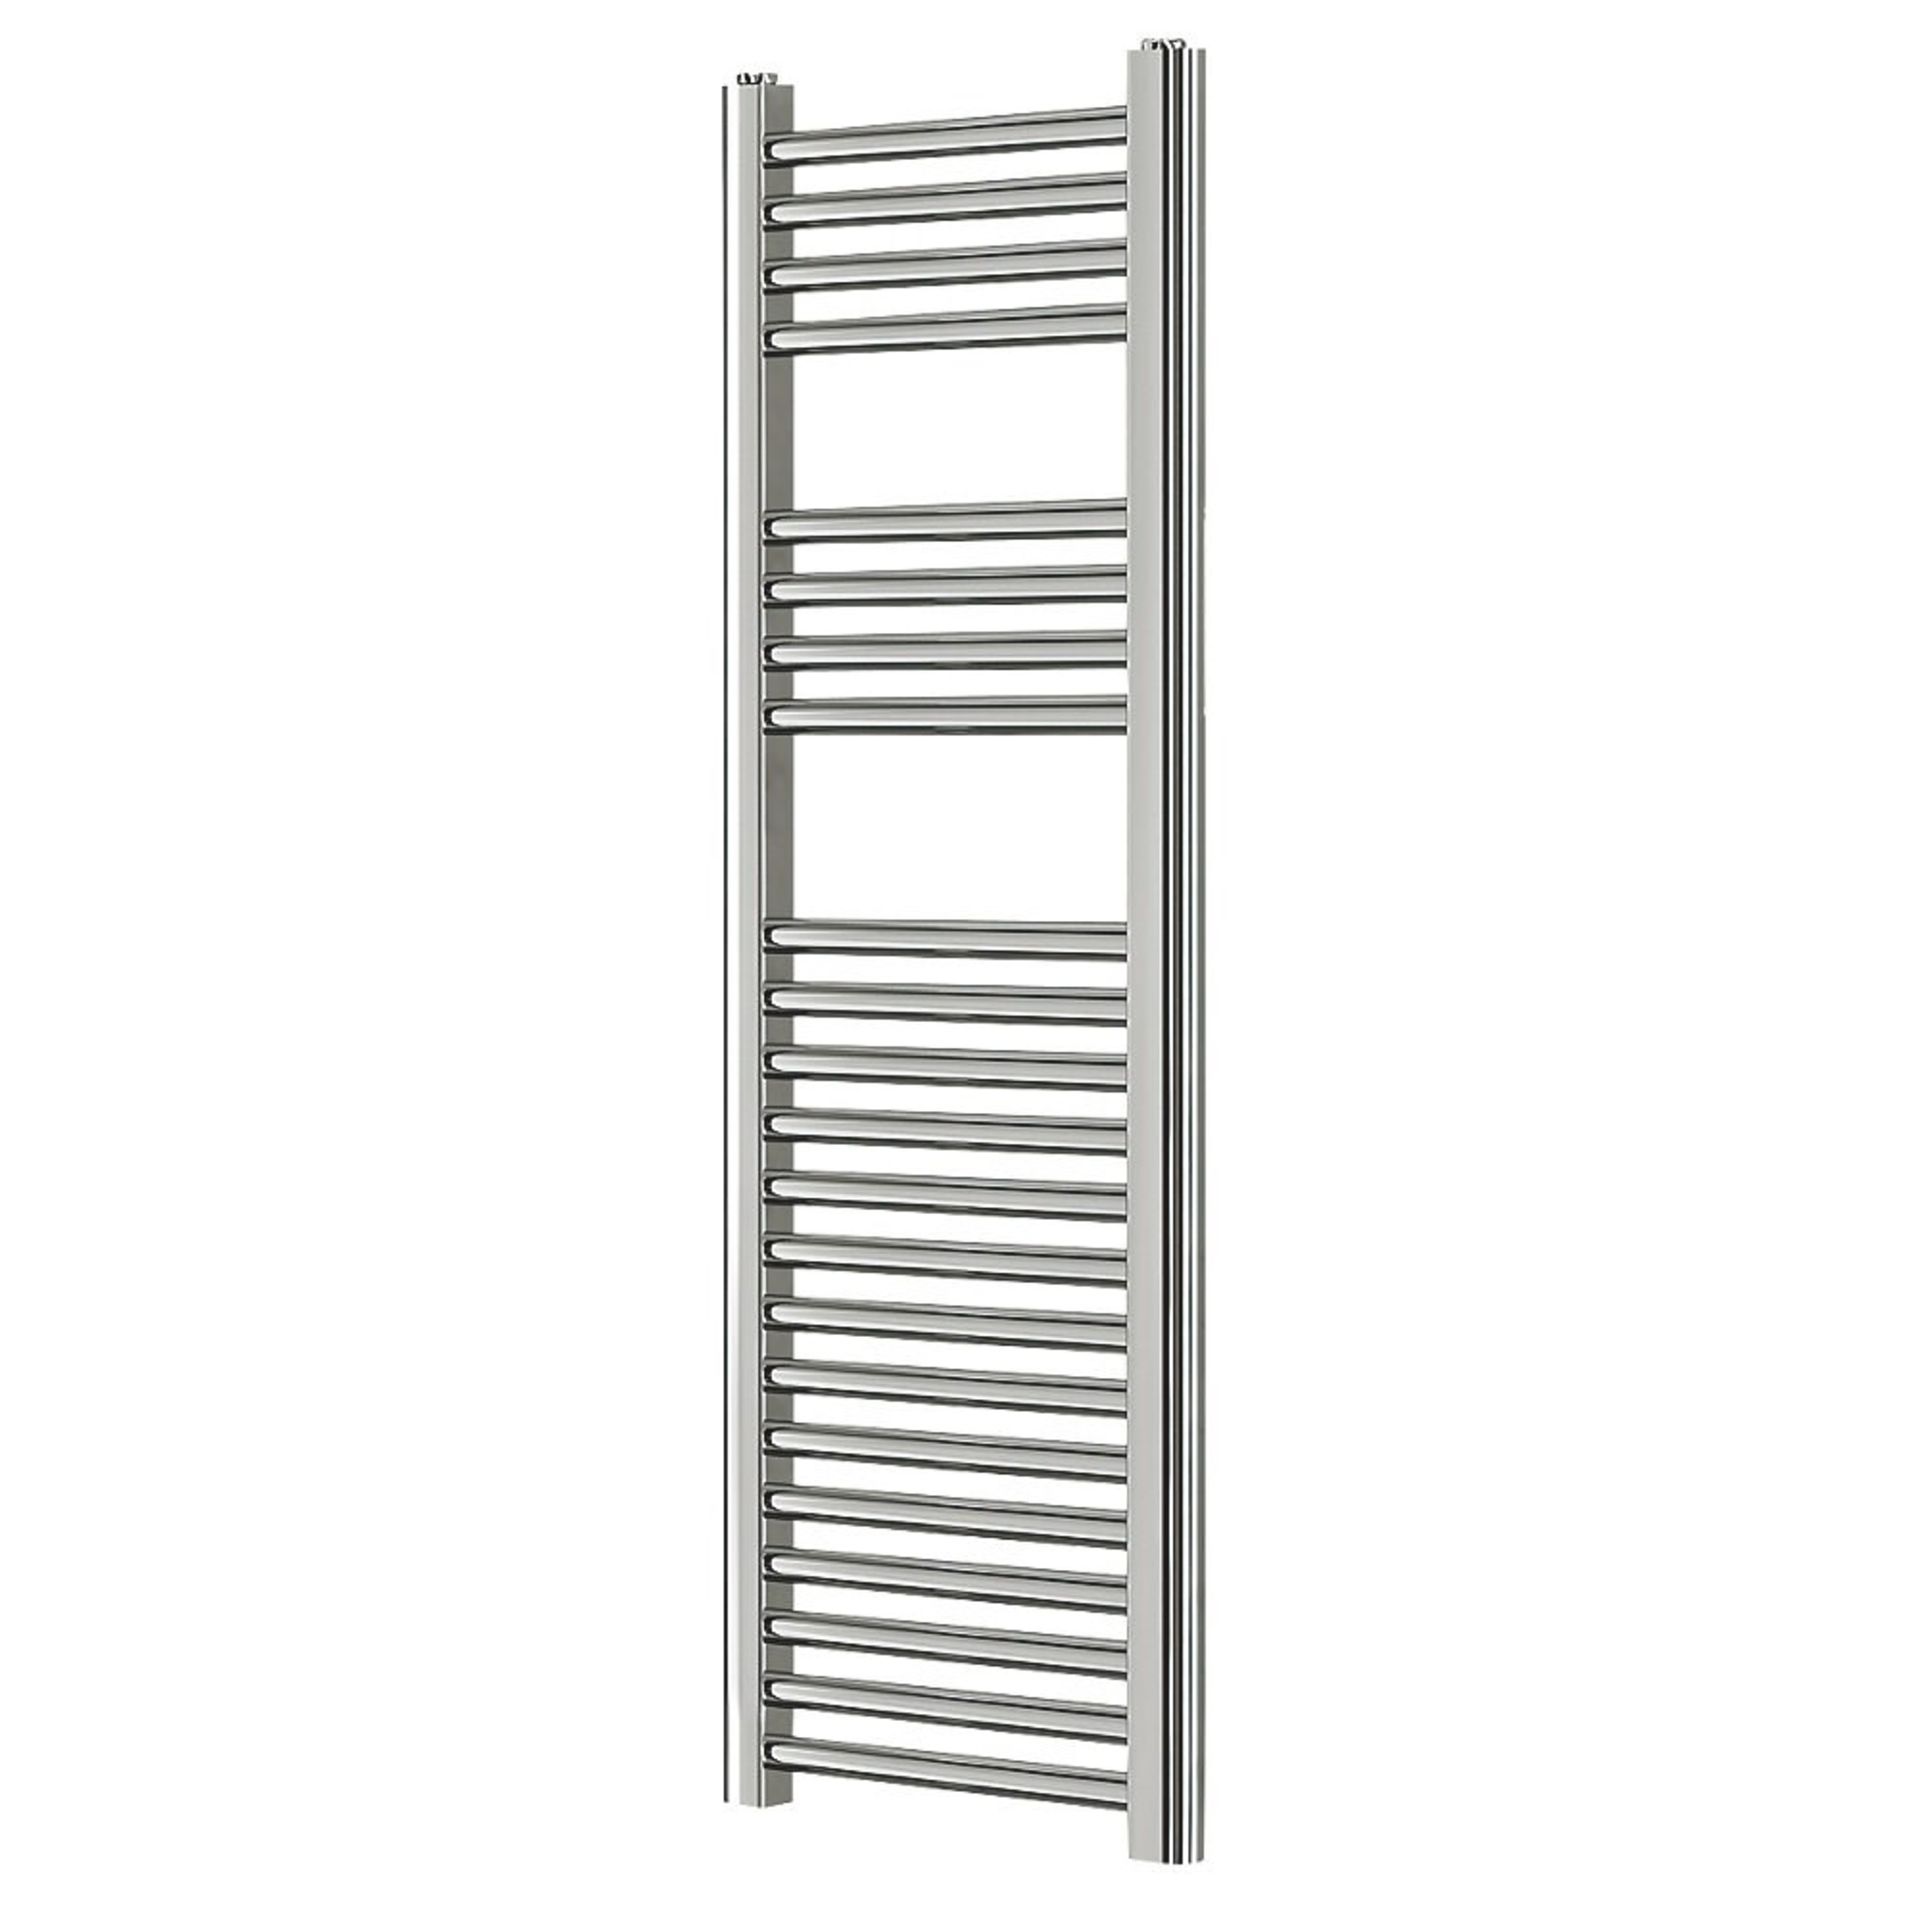 (OS132) 1100 X 300MM FLAT LADDER TOWEL RADIATOR CHROME. High quality chrome-plated steel - Image 2 of 2